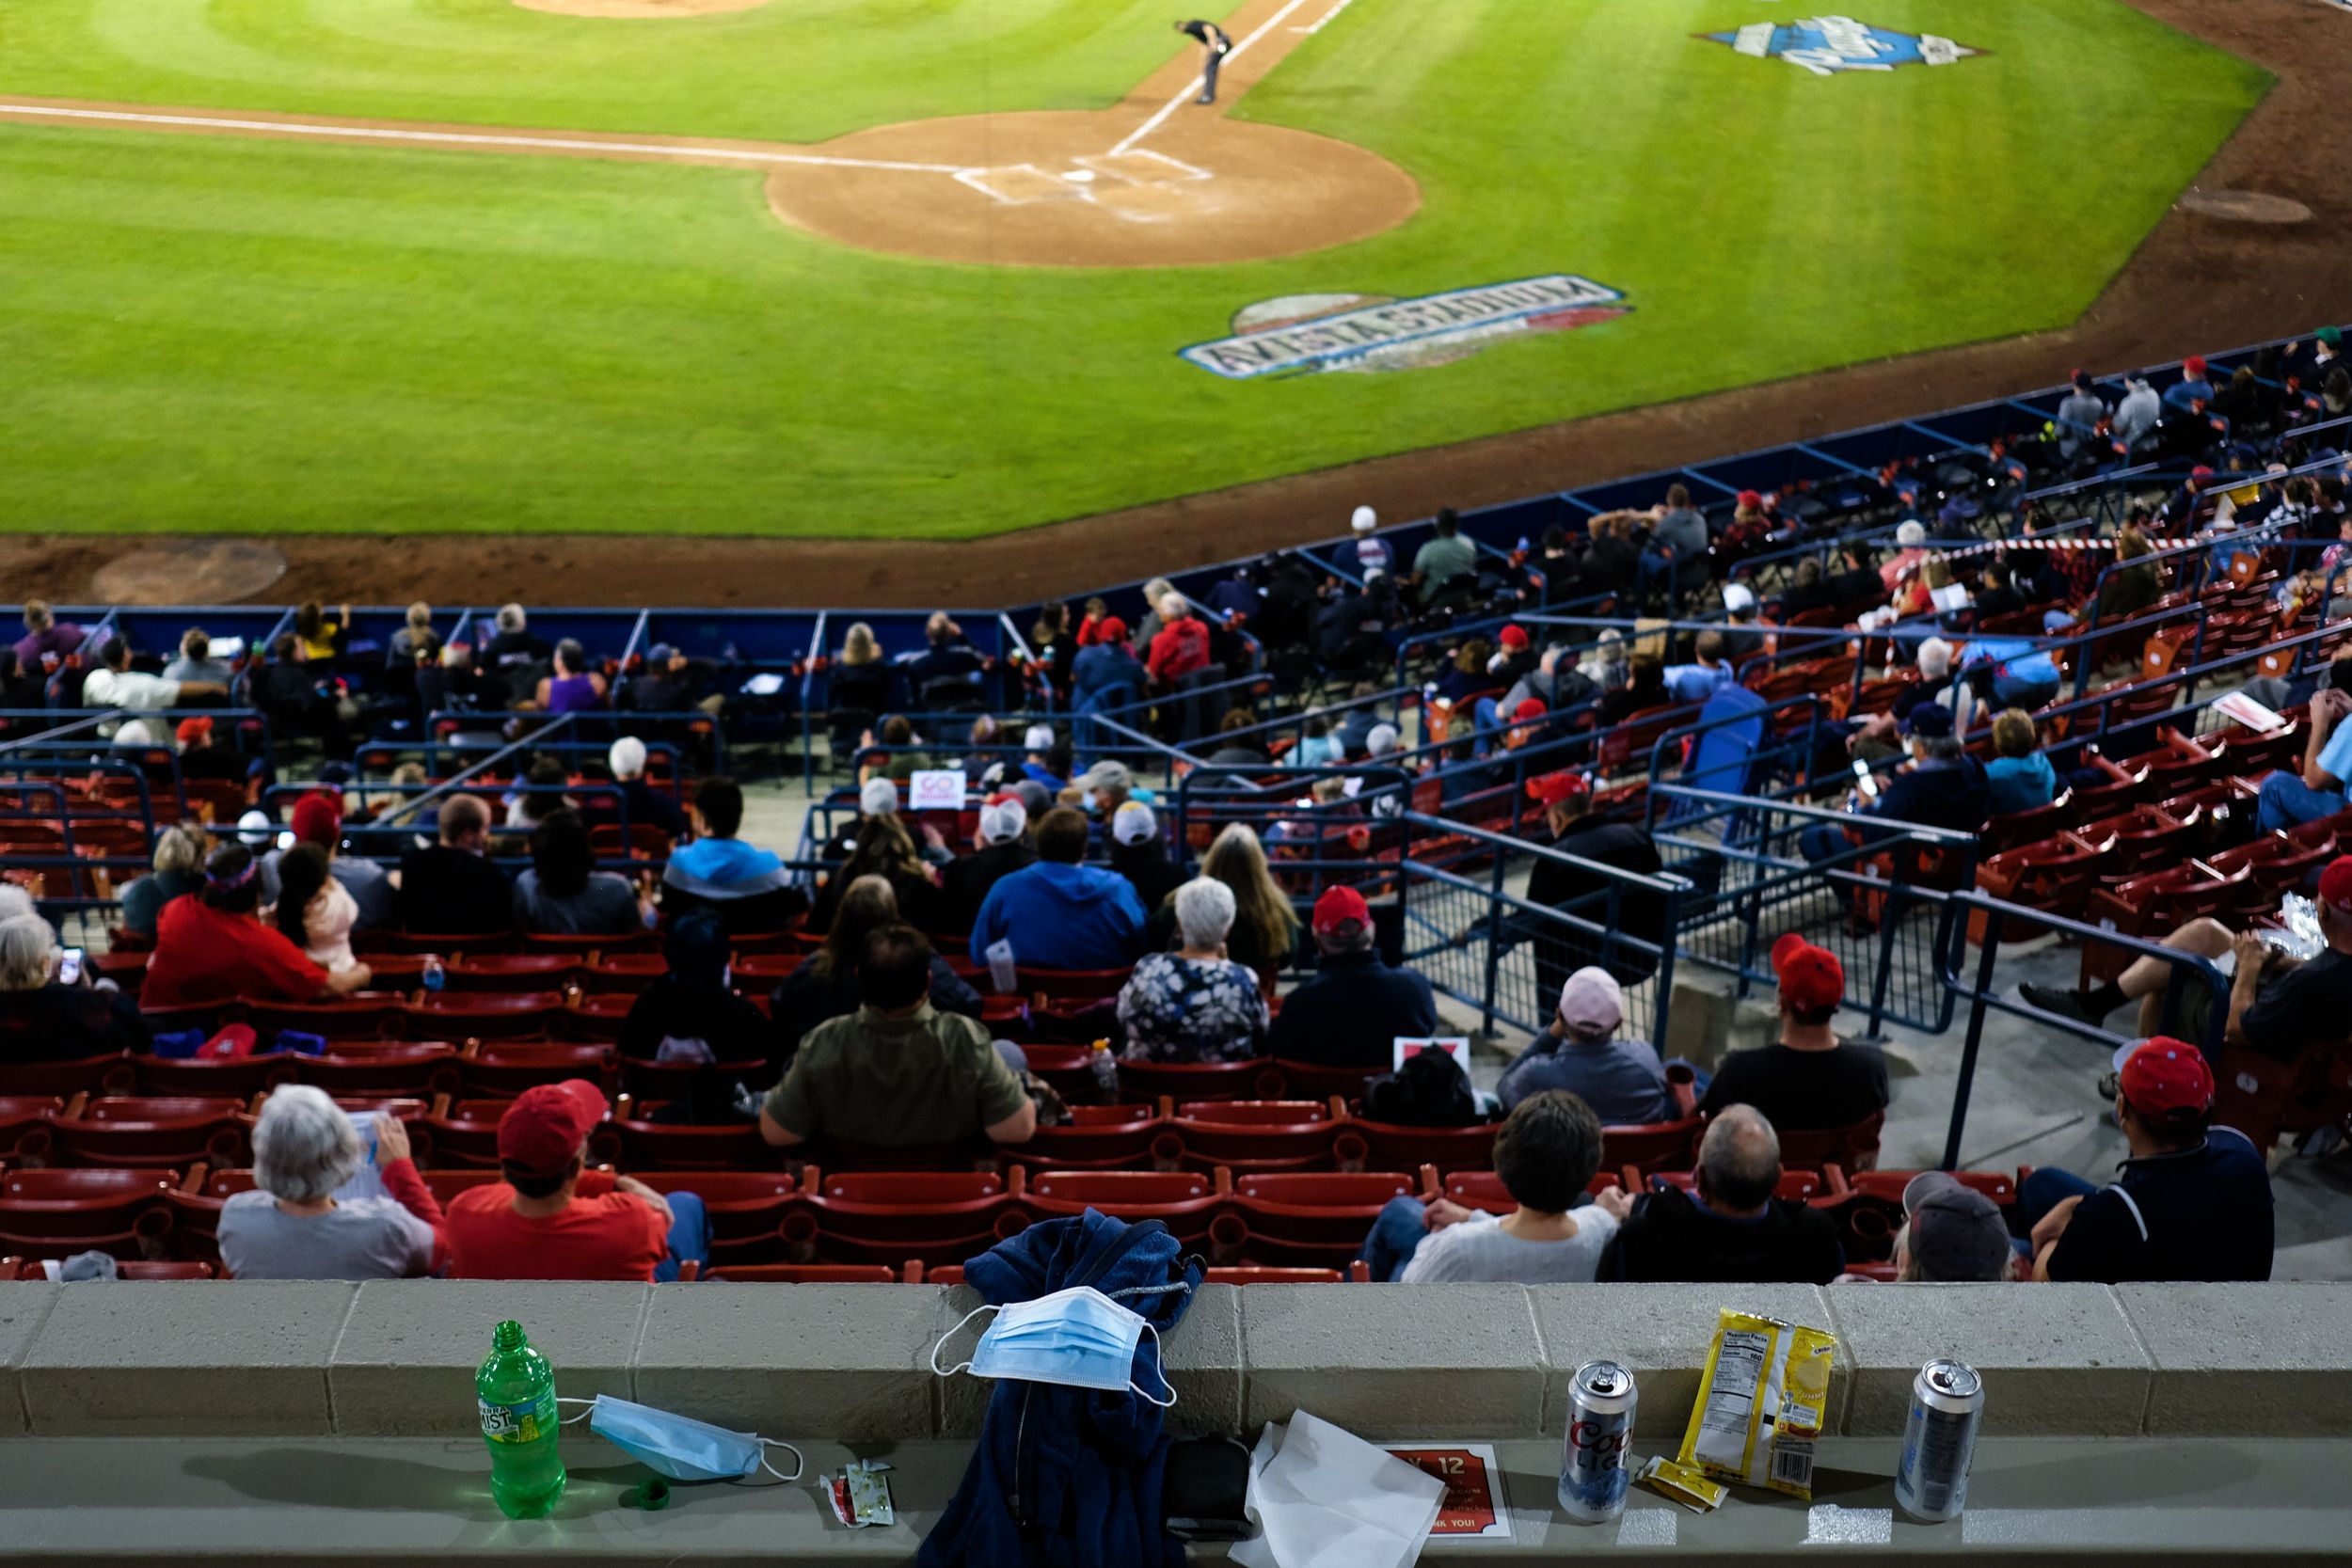 Buy me some peanuts and Cracker Jack and $23 million in stadium upgrades, Spokane  Indians